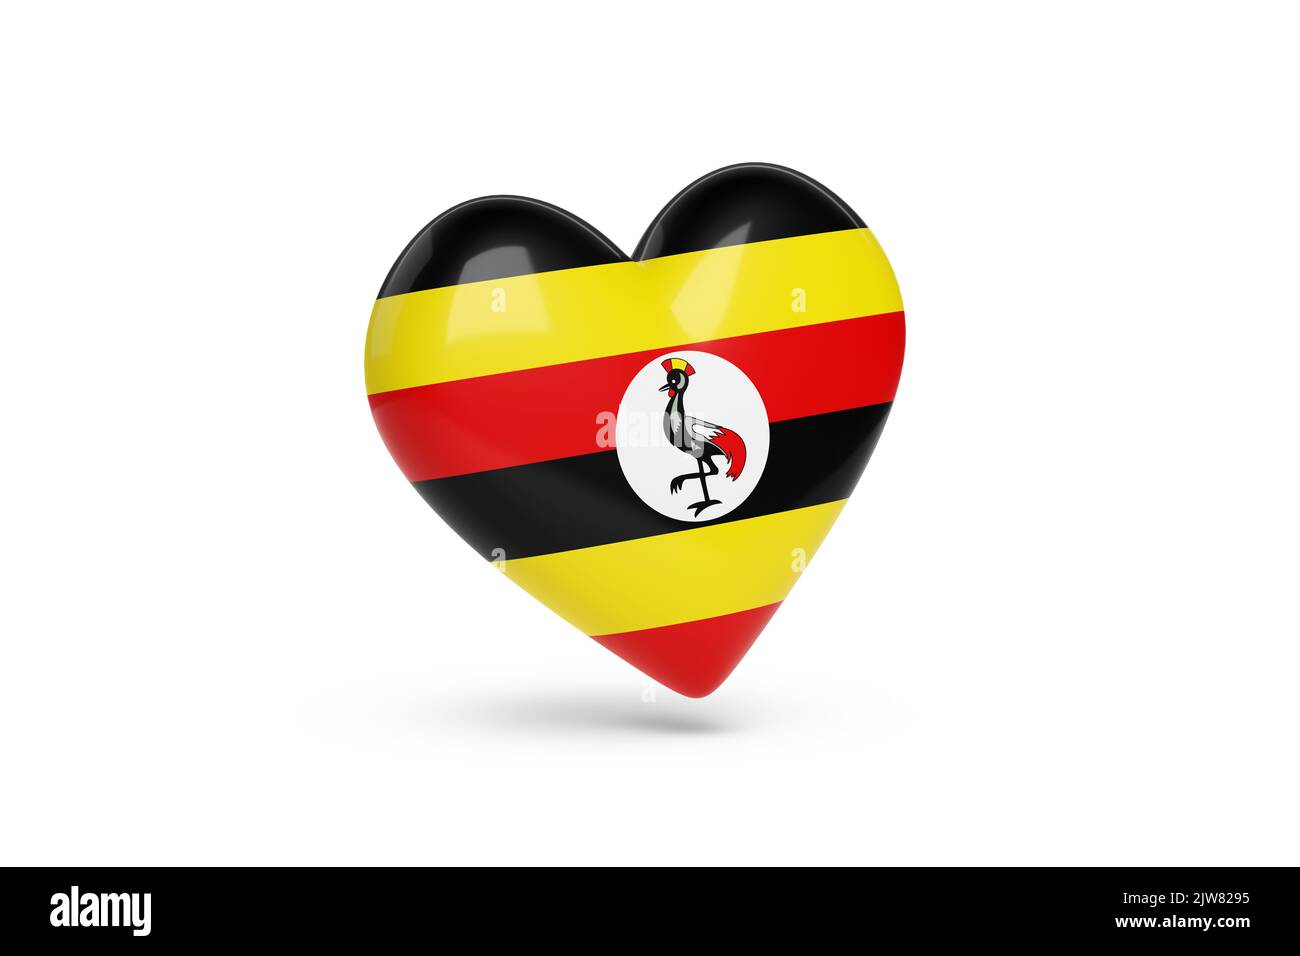 Heart with the colors of flag of Uganda isolated on white background. 3d illustration. Stock Photo